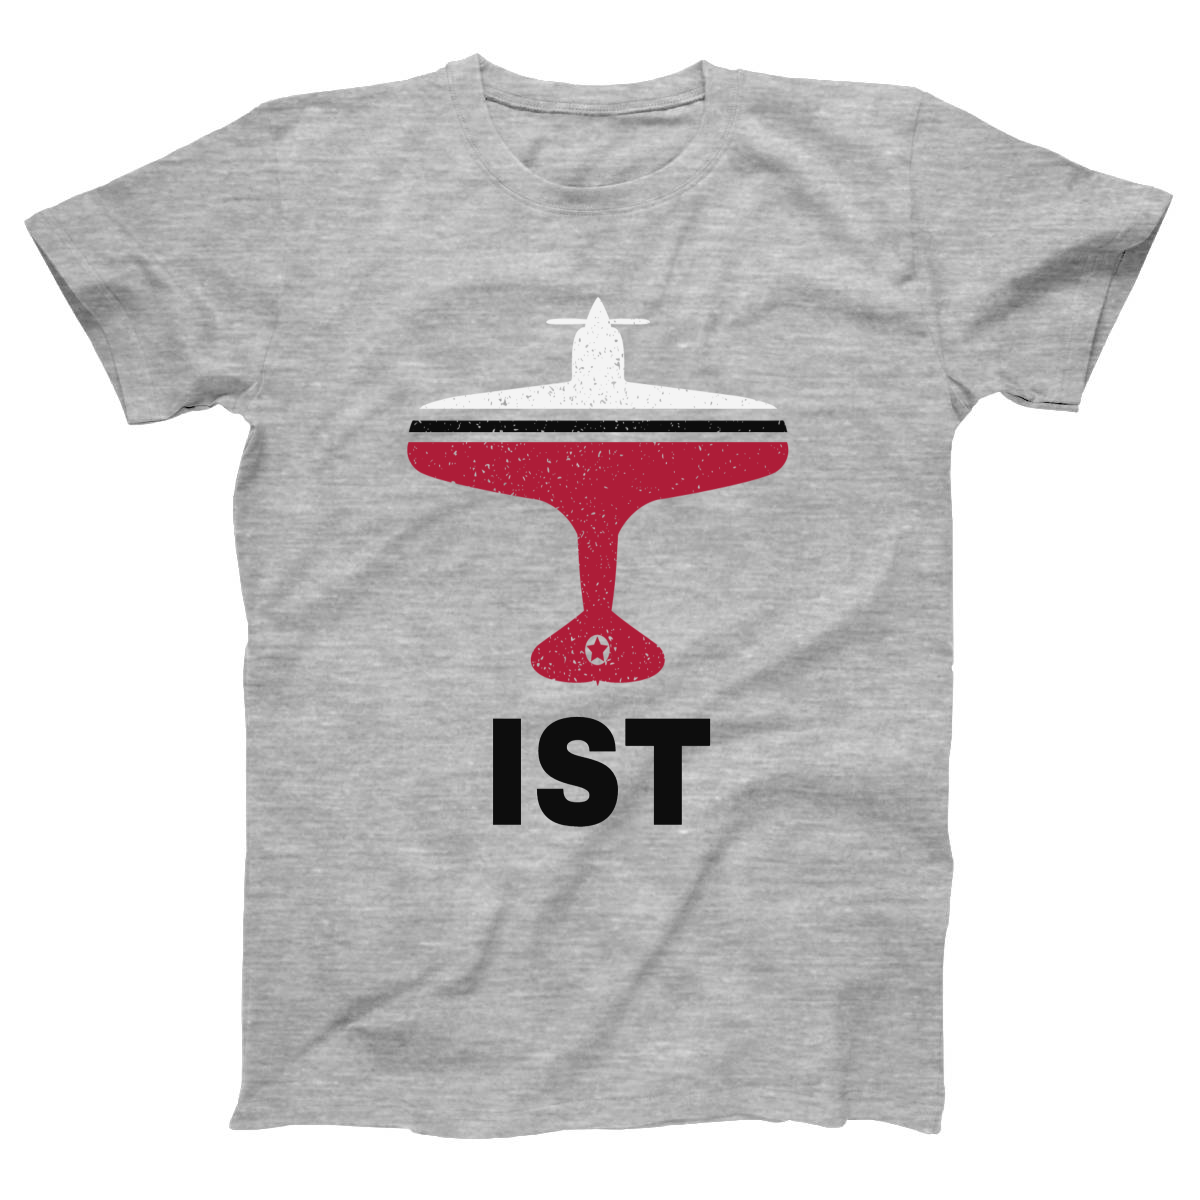 Fly Istanbul IST Airport Women's T-shirt | Gray